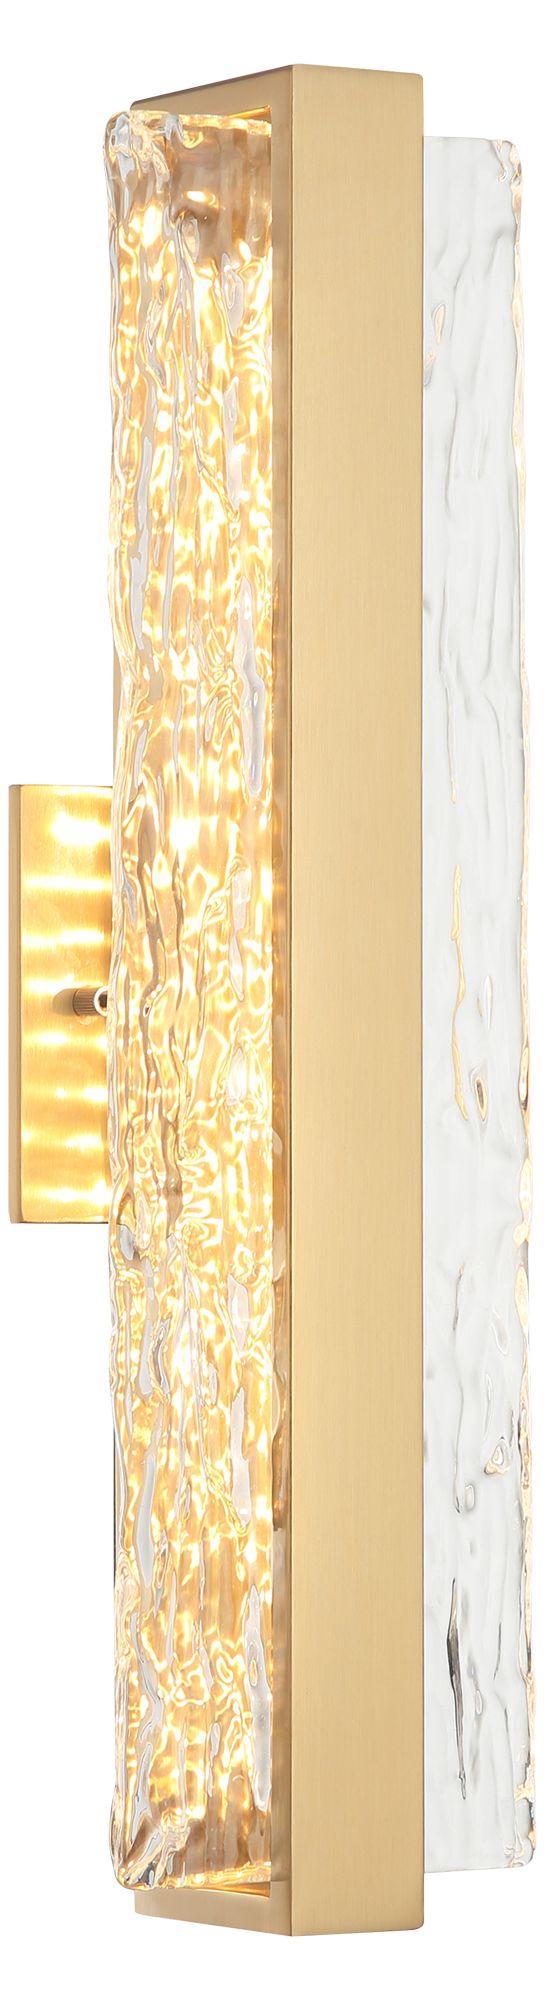 NIAGARA Wall sconce Gold INTEGRATED LED - S02018AG | MATTEO